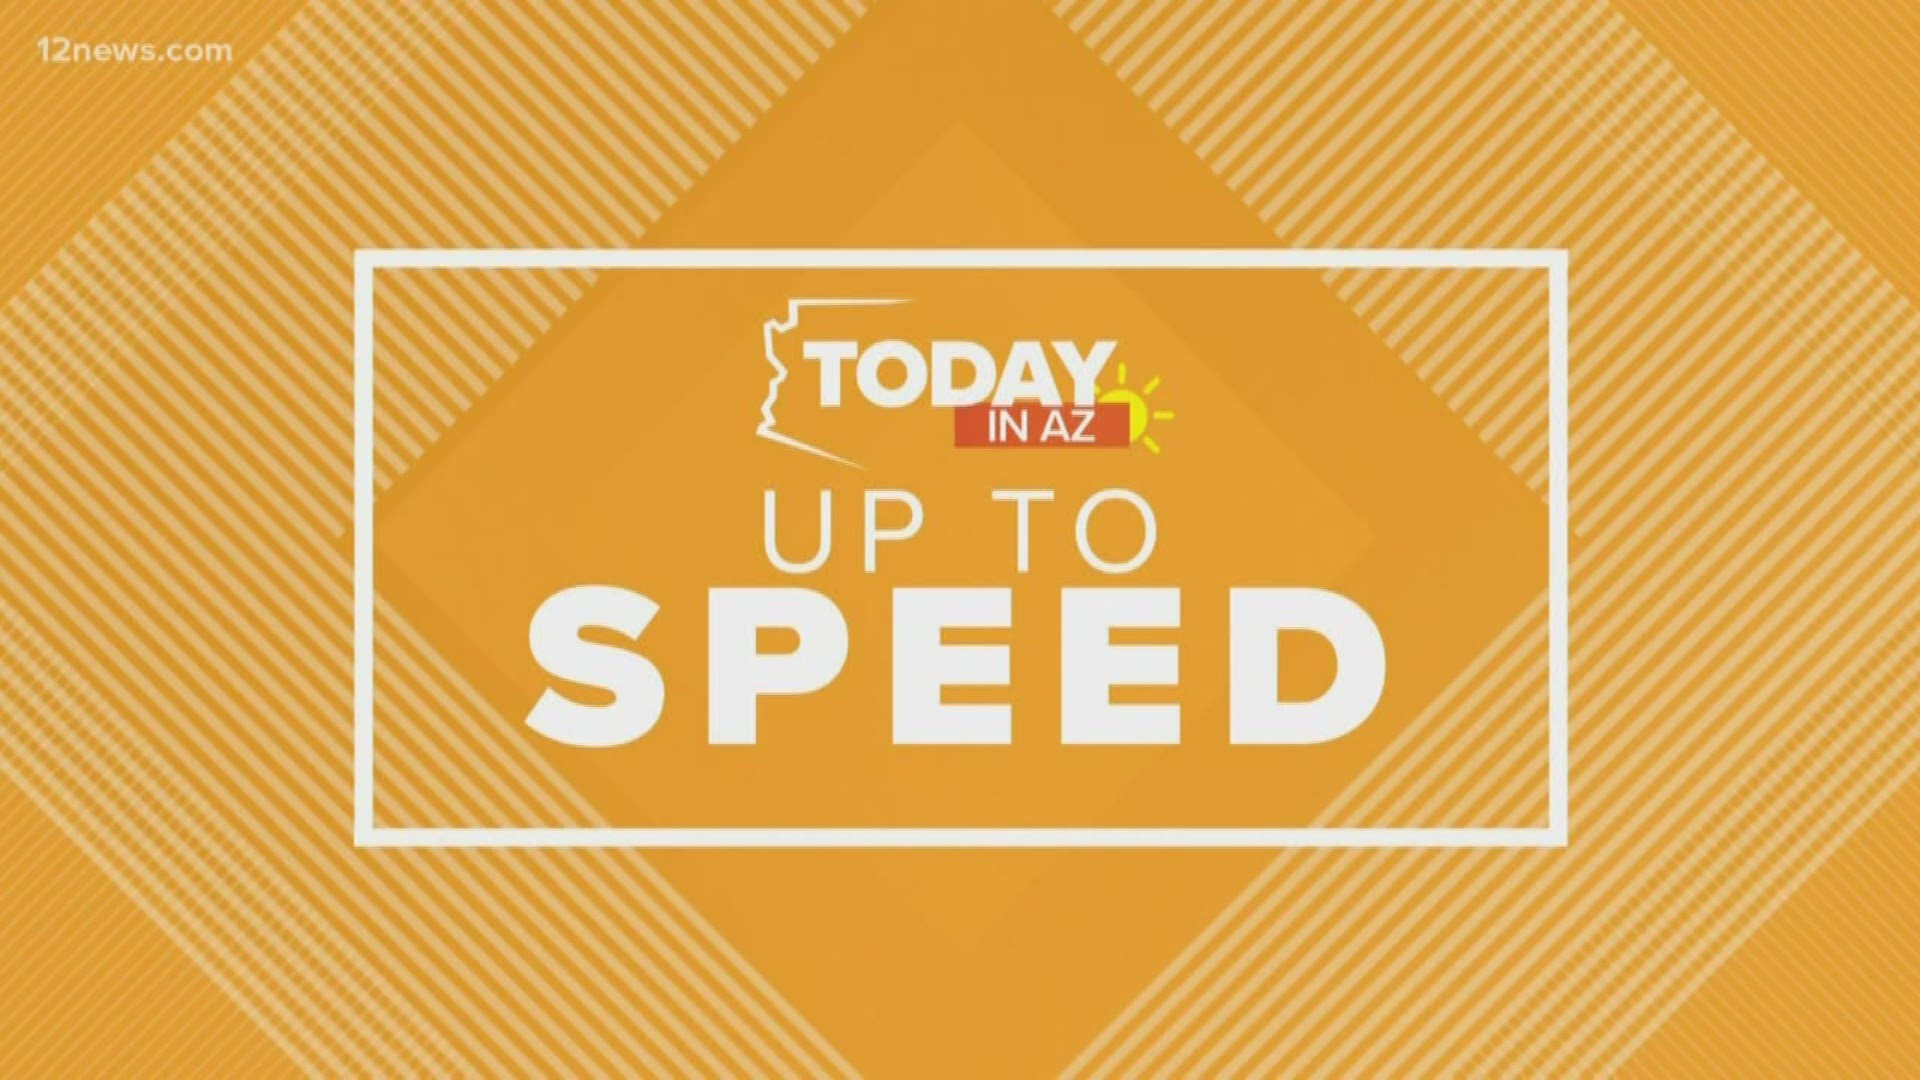 We get you "Up to Speed" on the latest news happening around the Valley and across the country on Monday morning.